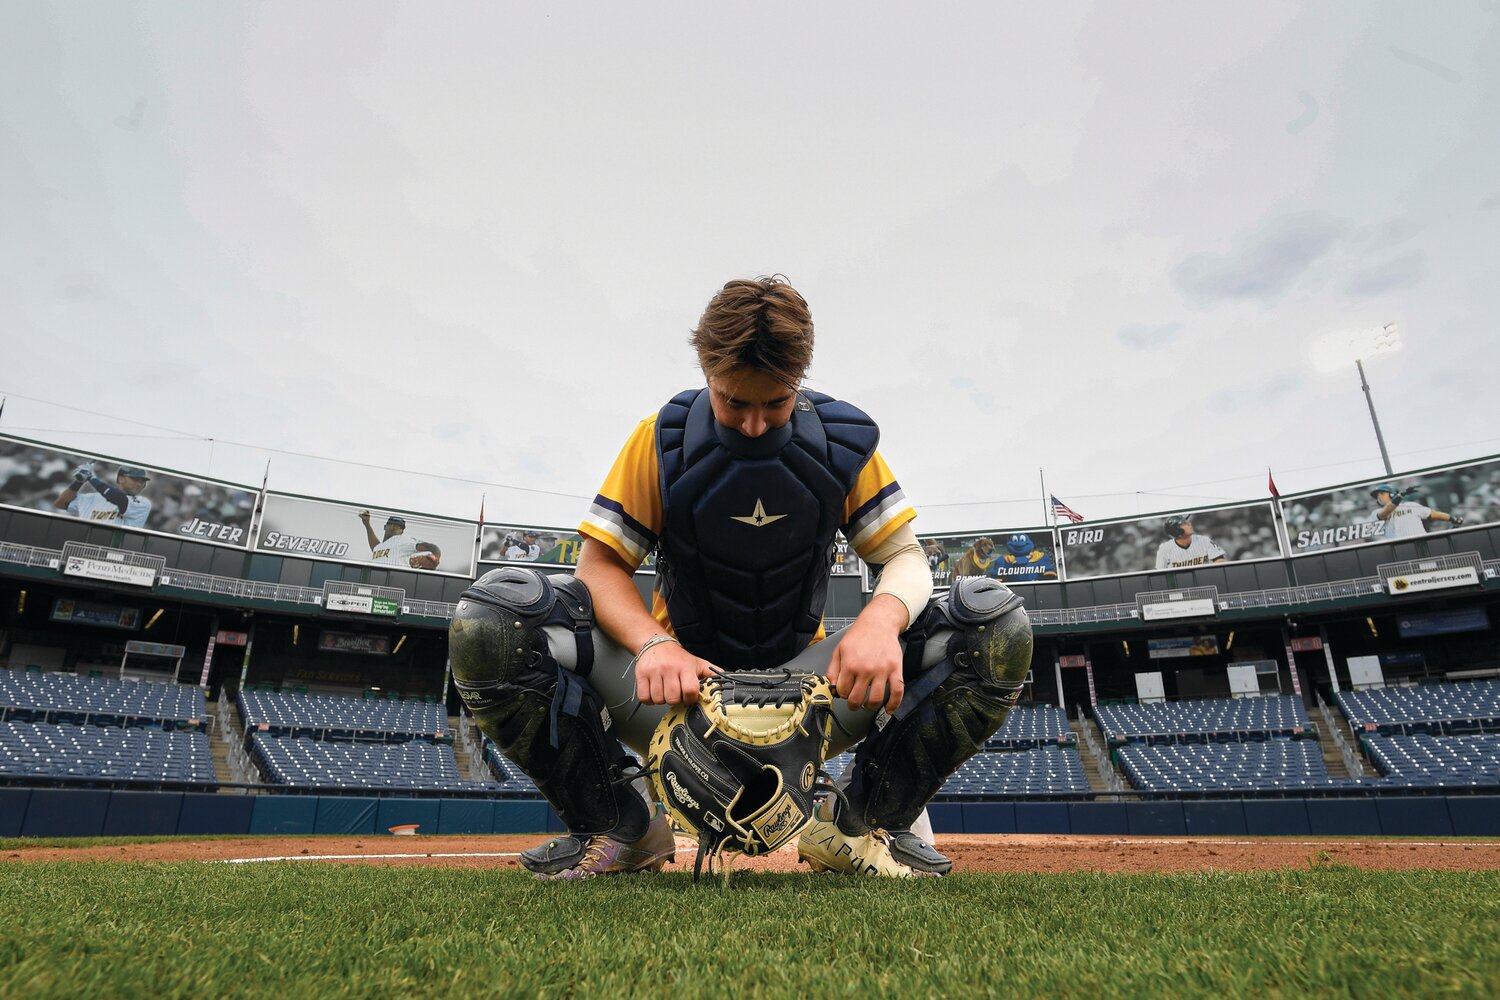 New Hope-Solebury catcher Brooks Saft has a moment before the start of the game at home plate.